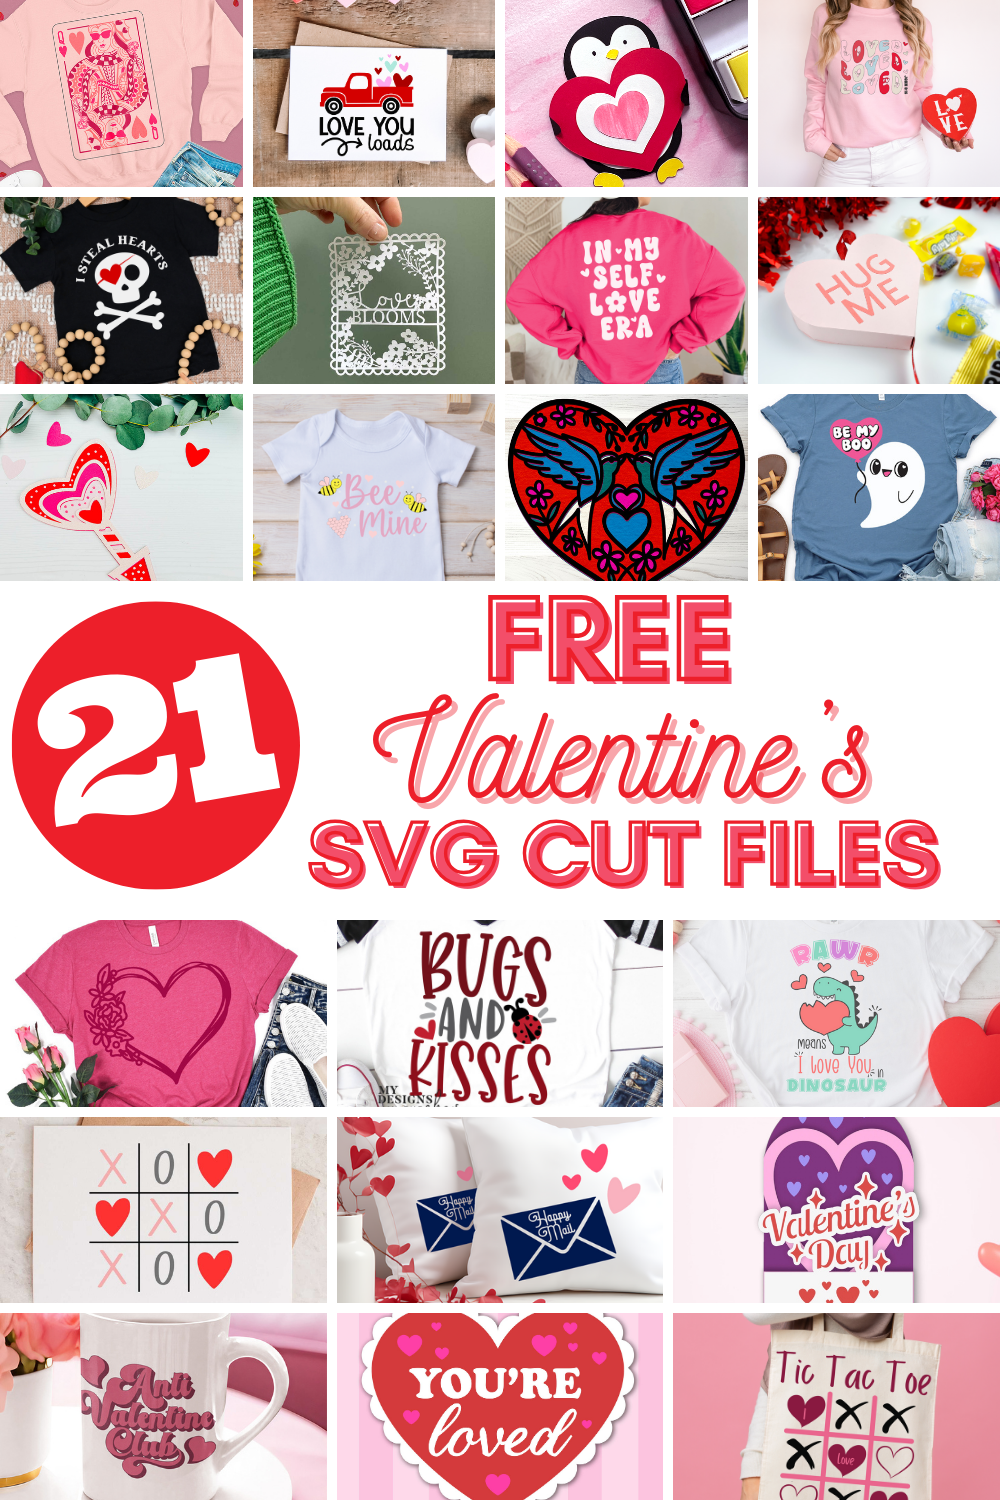 Free Valentines SVG files for themed crafting and gifts.